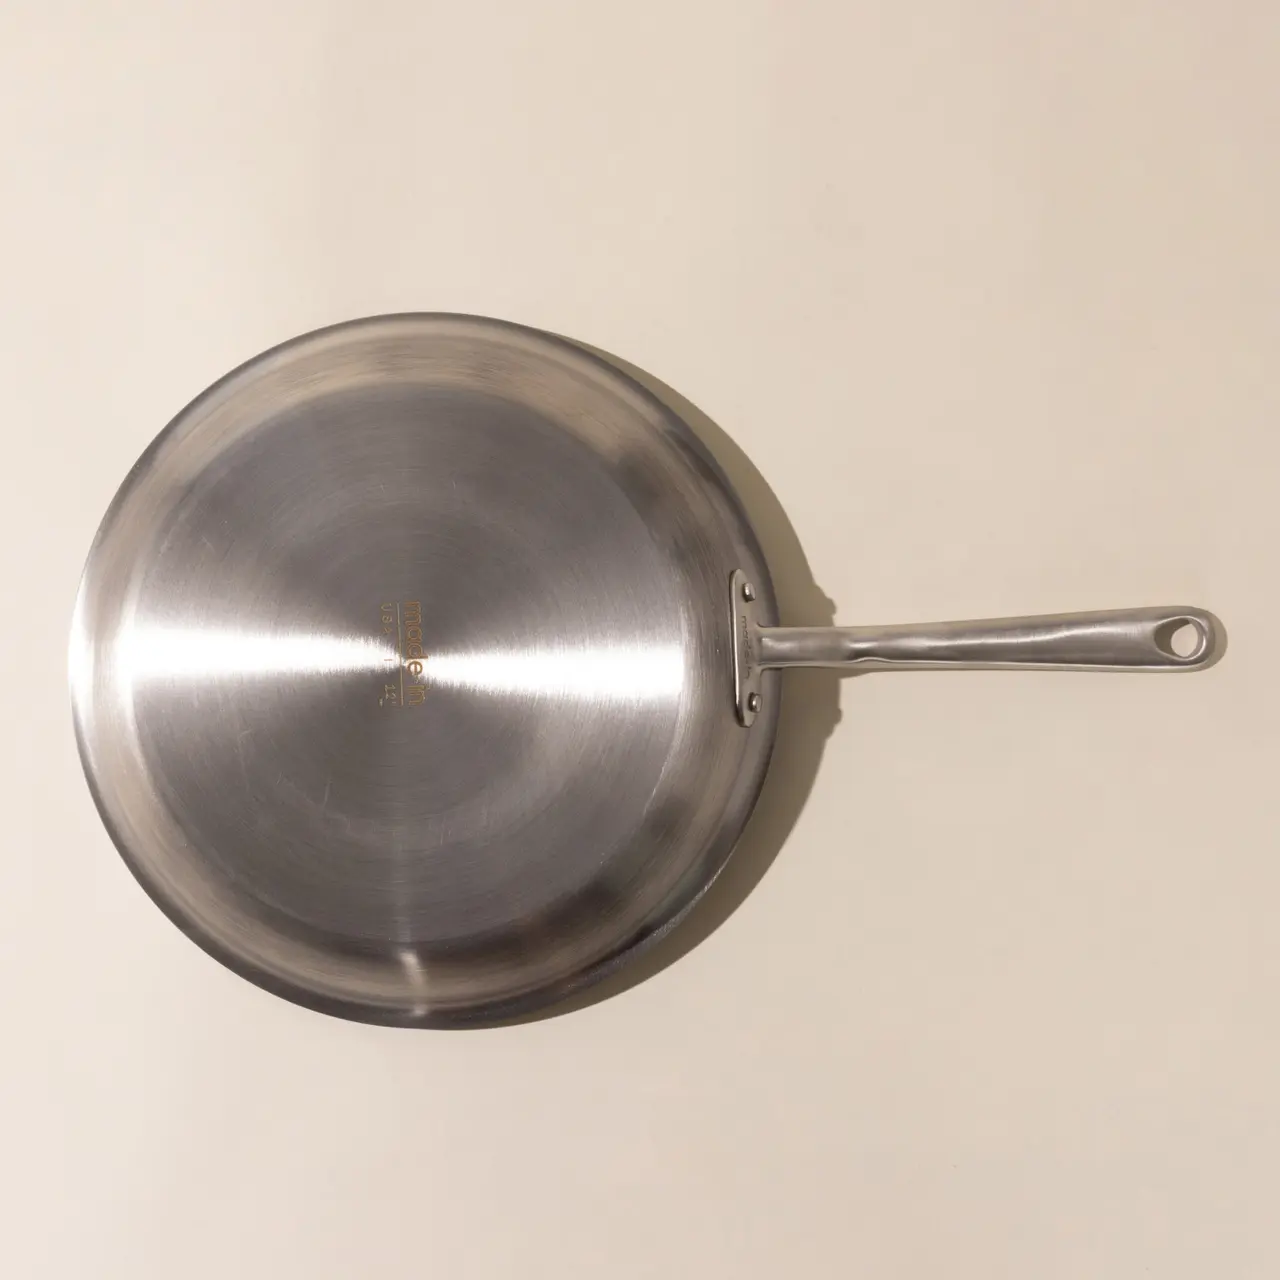 A stainless steel frying pan with a long handle is displayed against a neutral background.